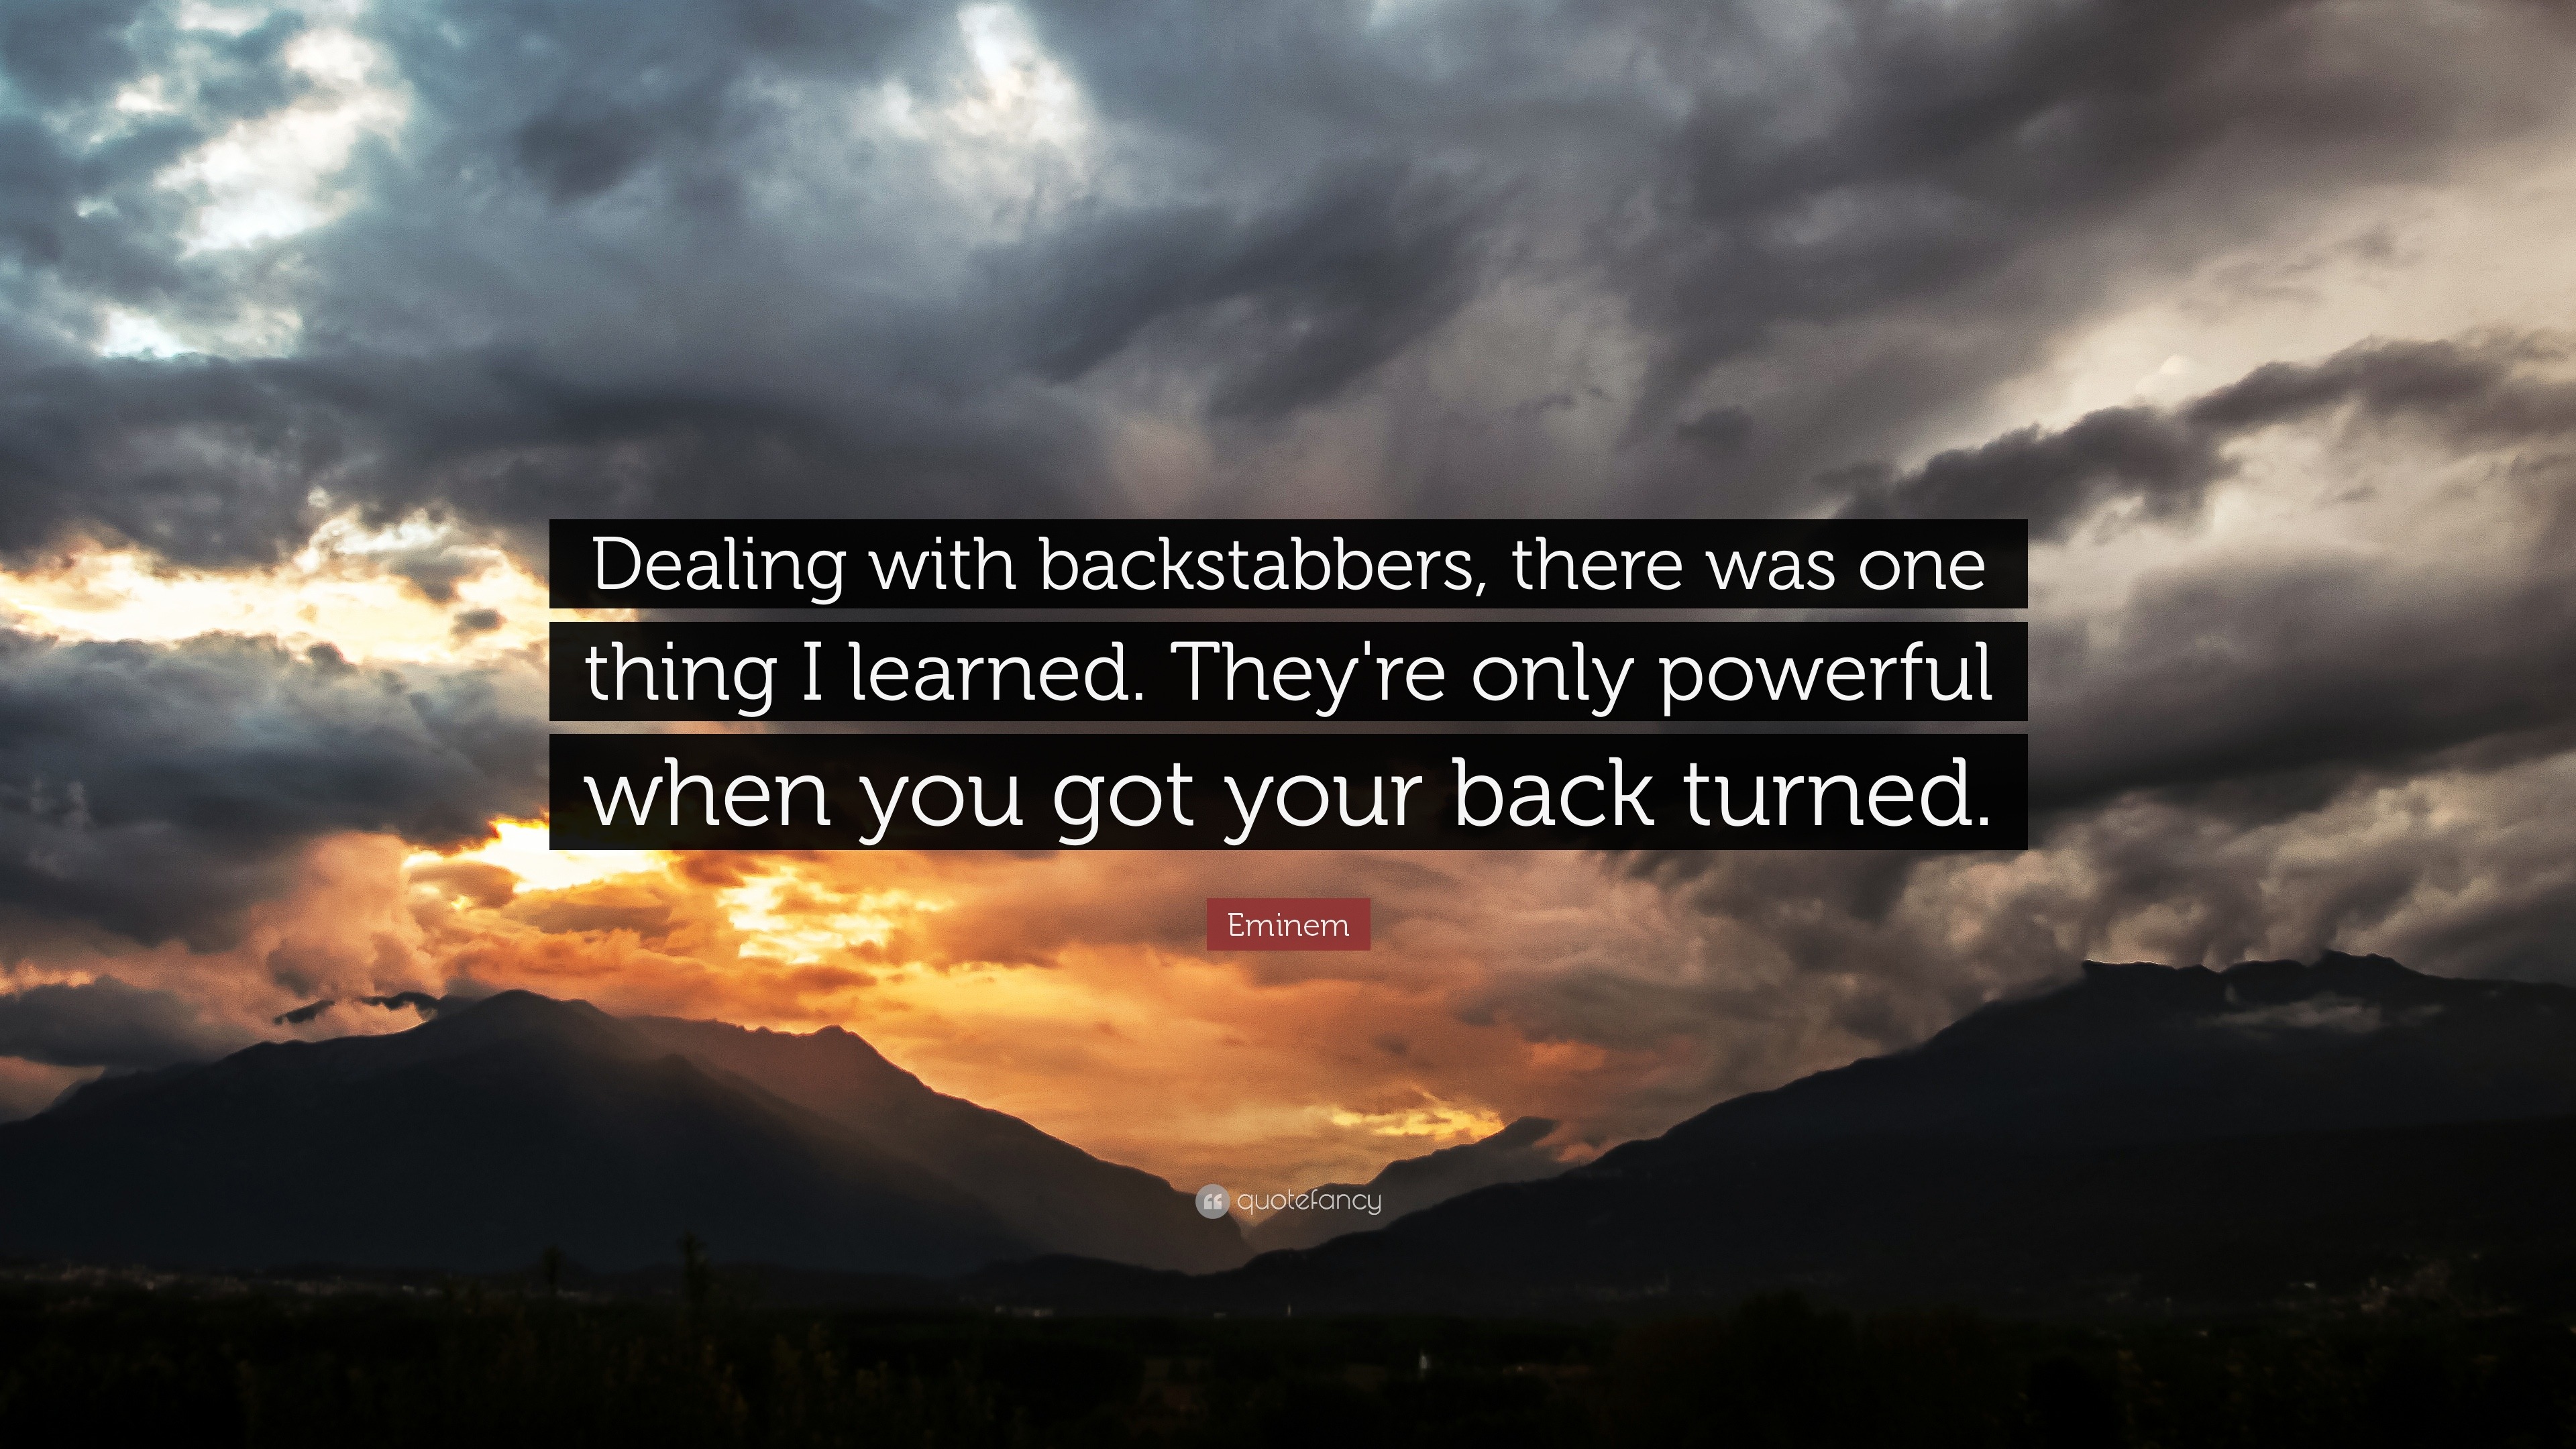 Eminem Quote: “Dealing with backstabbers, there was one thing I learned